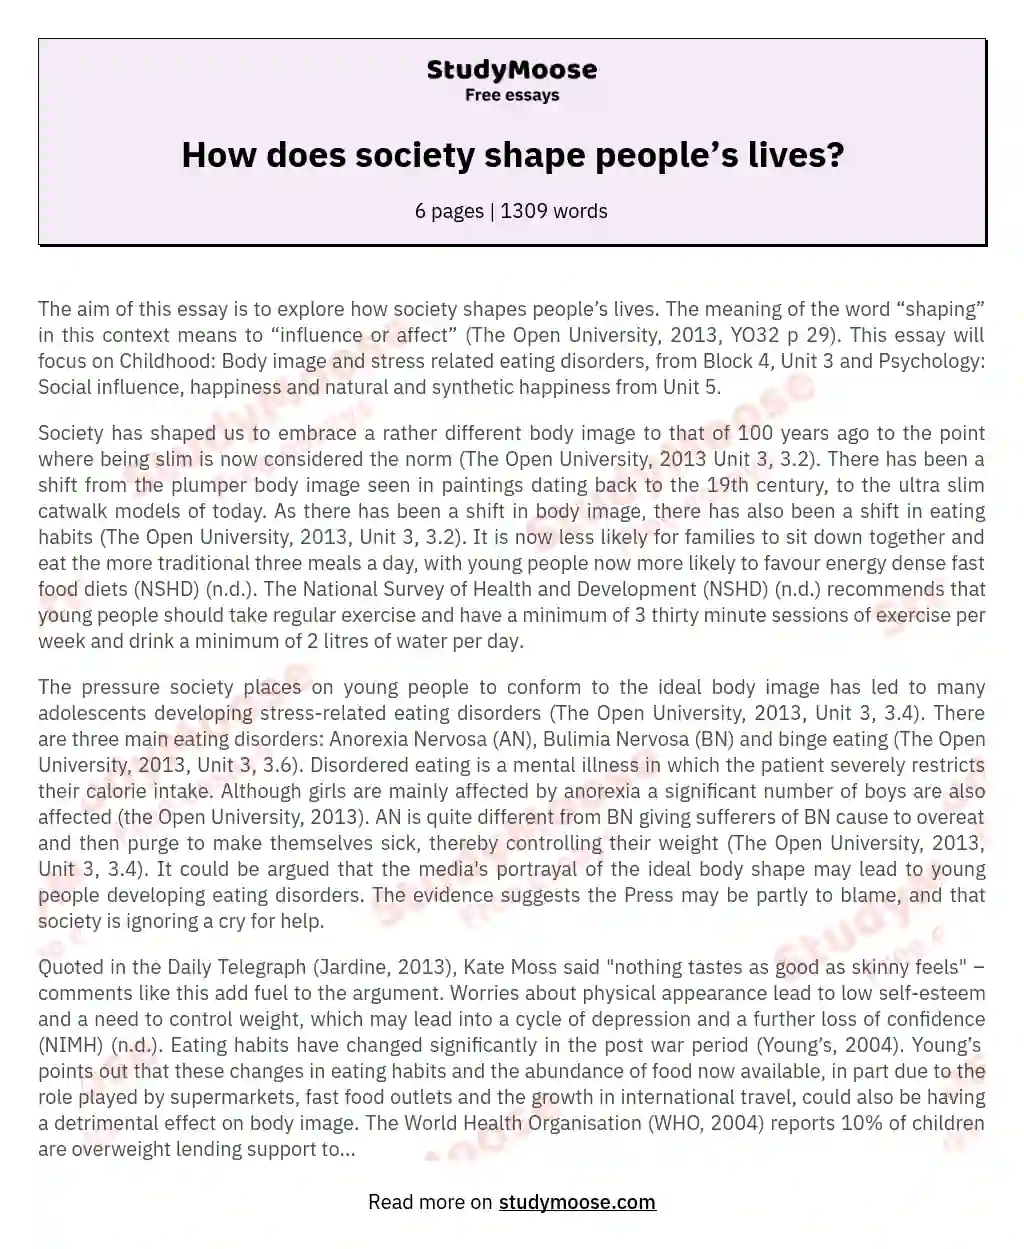 How does society shape people’s lives? essay